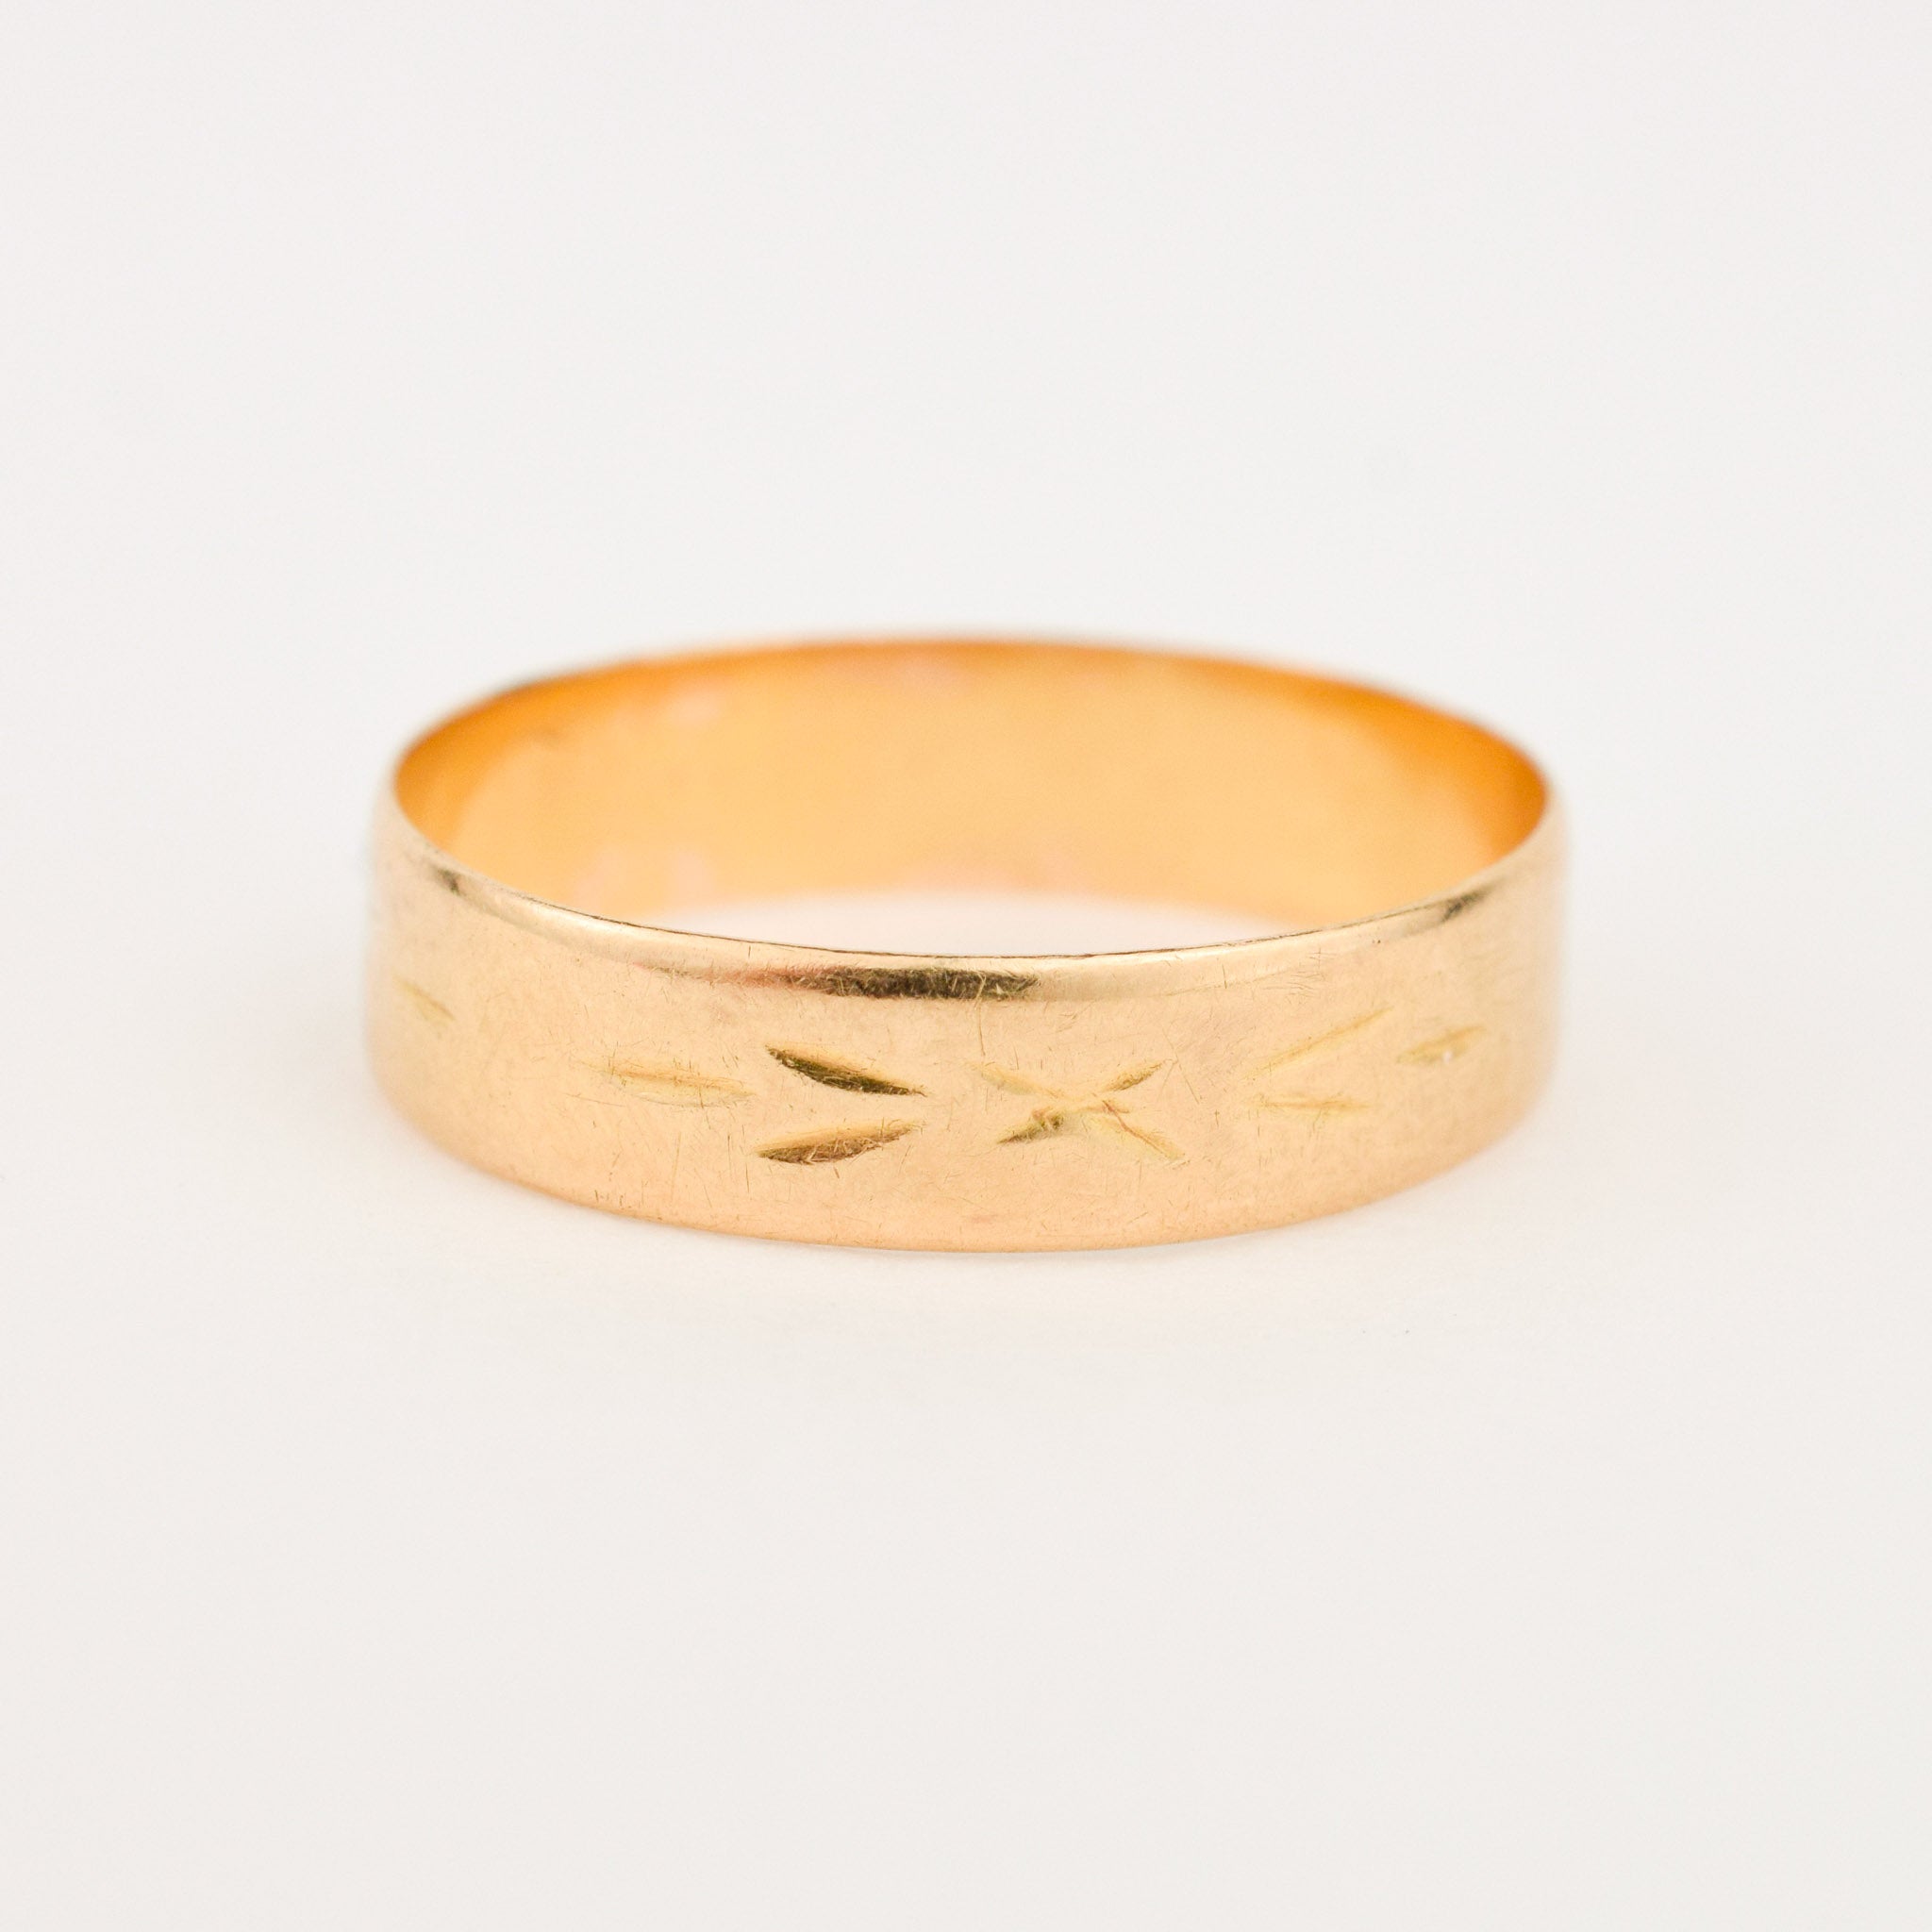 5mm 18k yellow gold band, Folklor